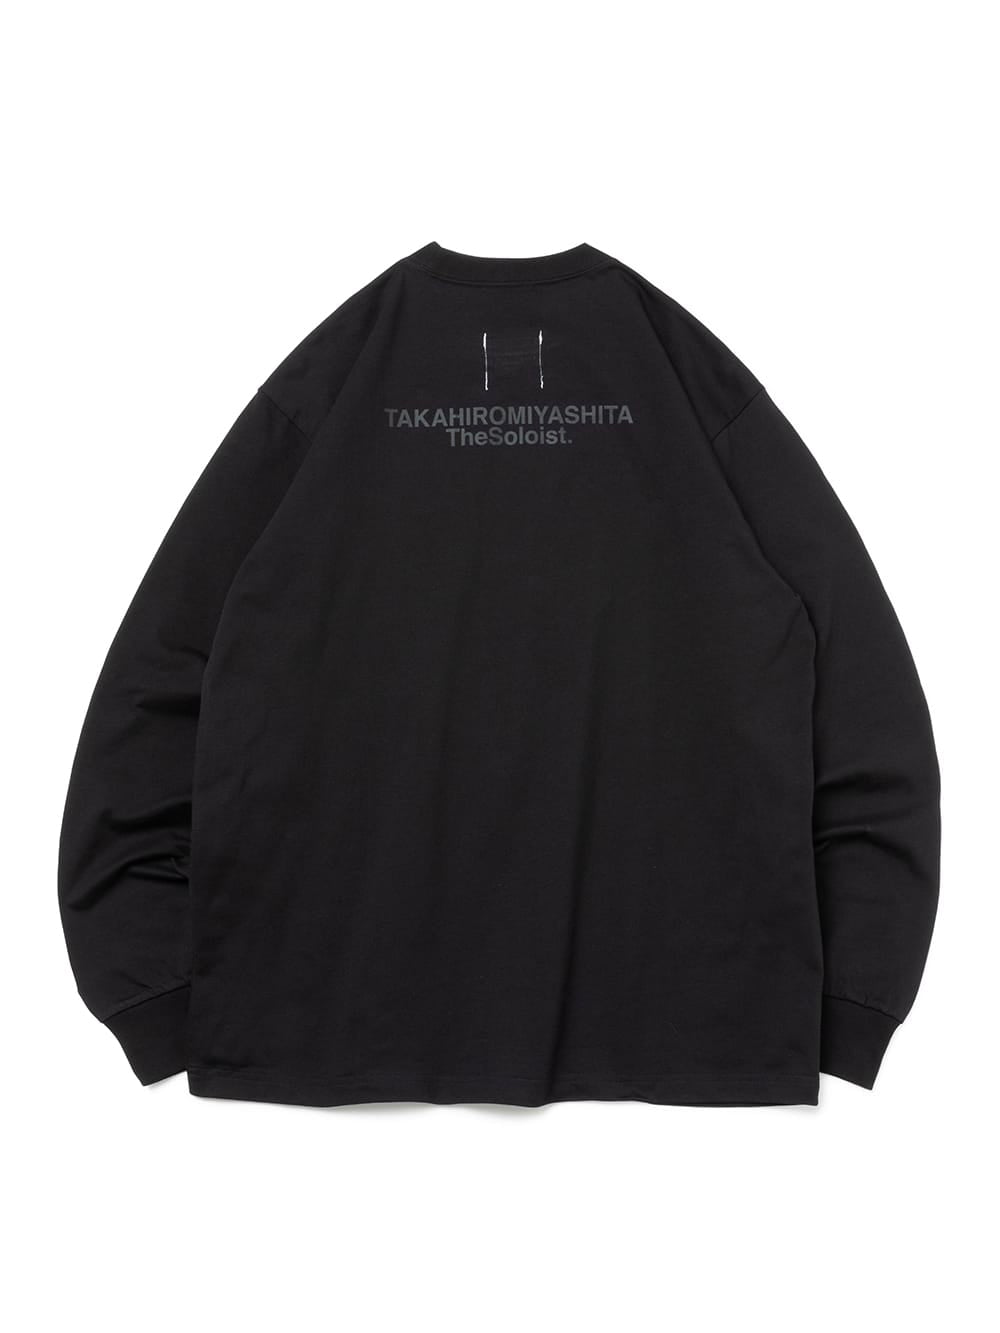 L/S Cotton Tee.(I AM THE SOLOIST.)